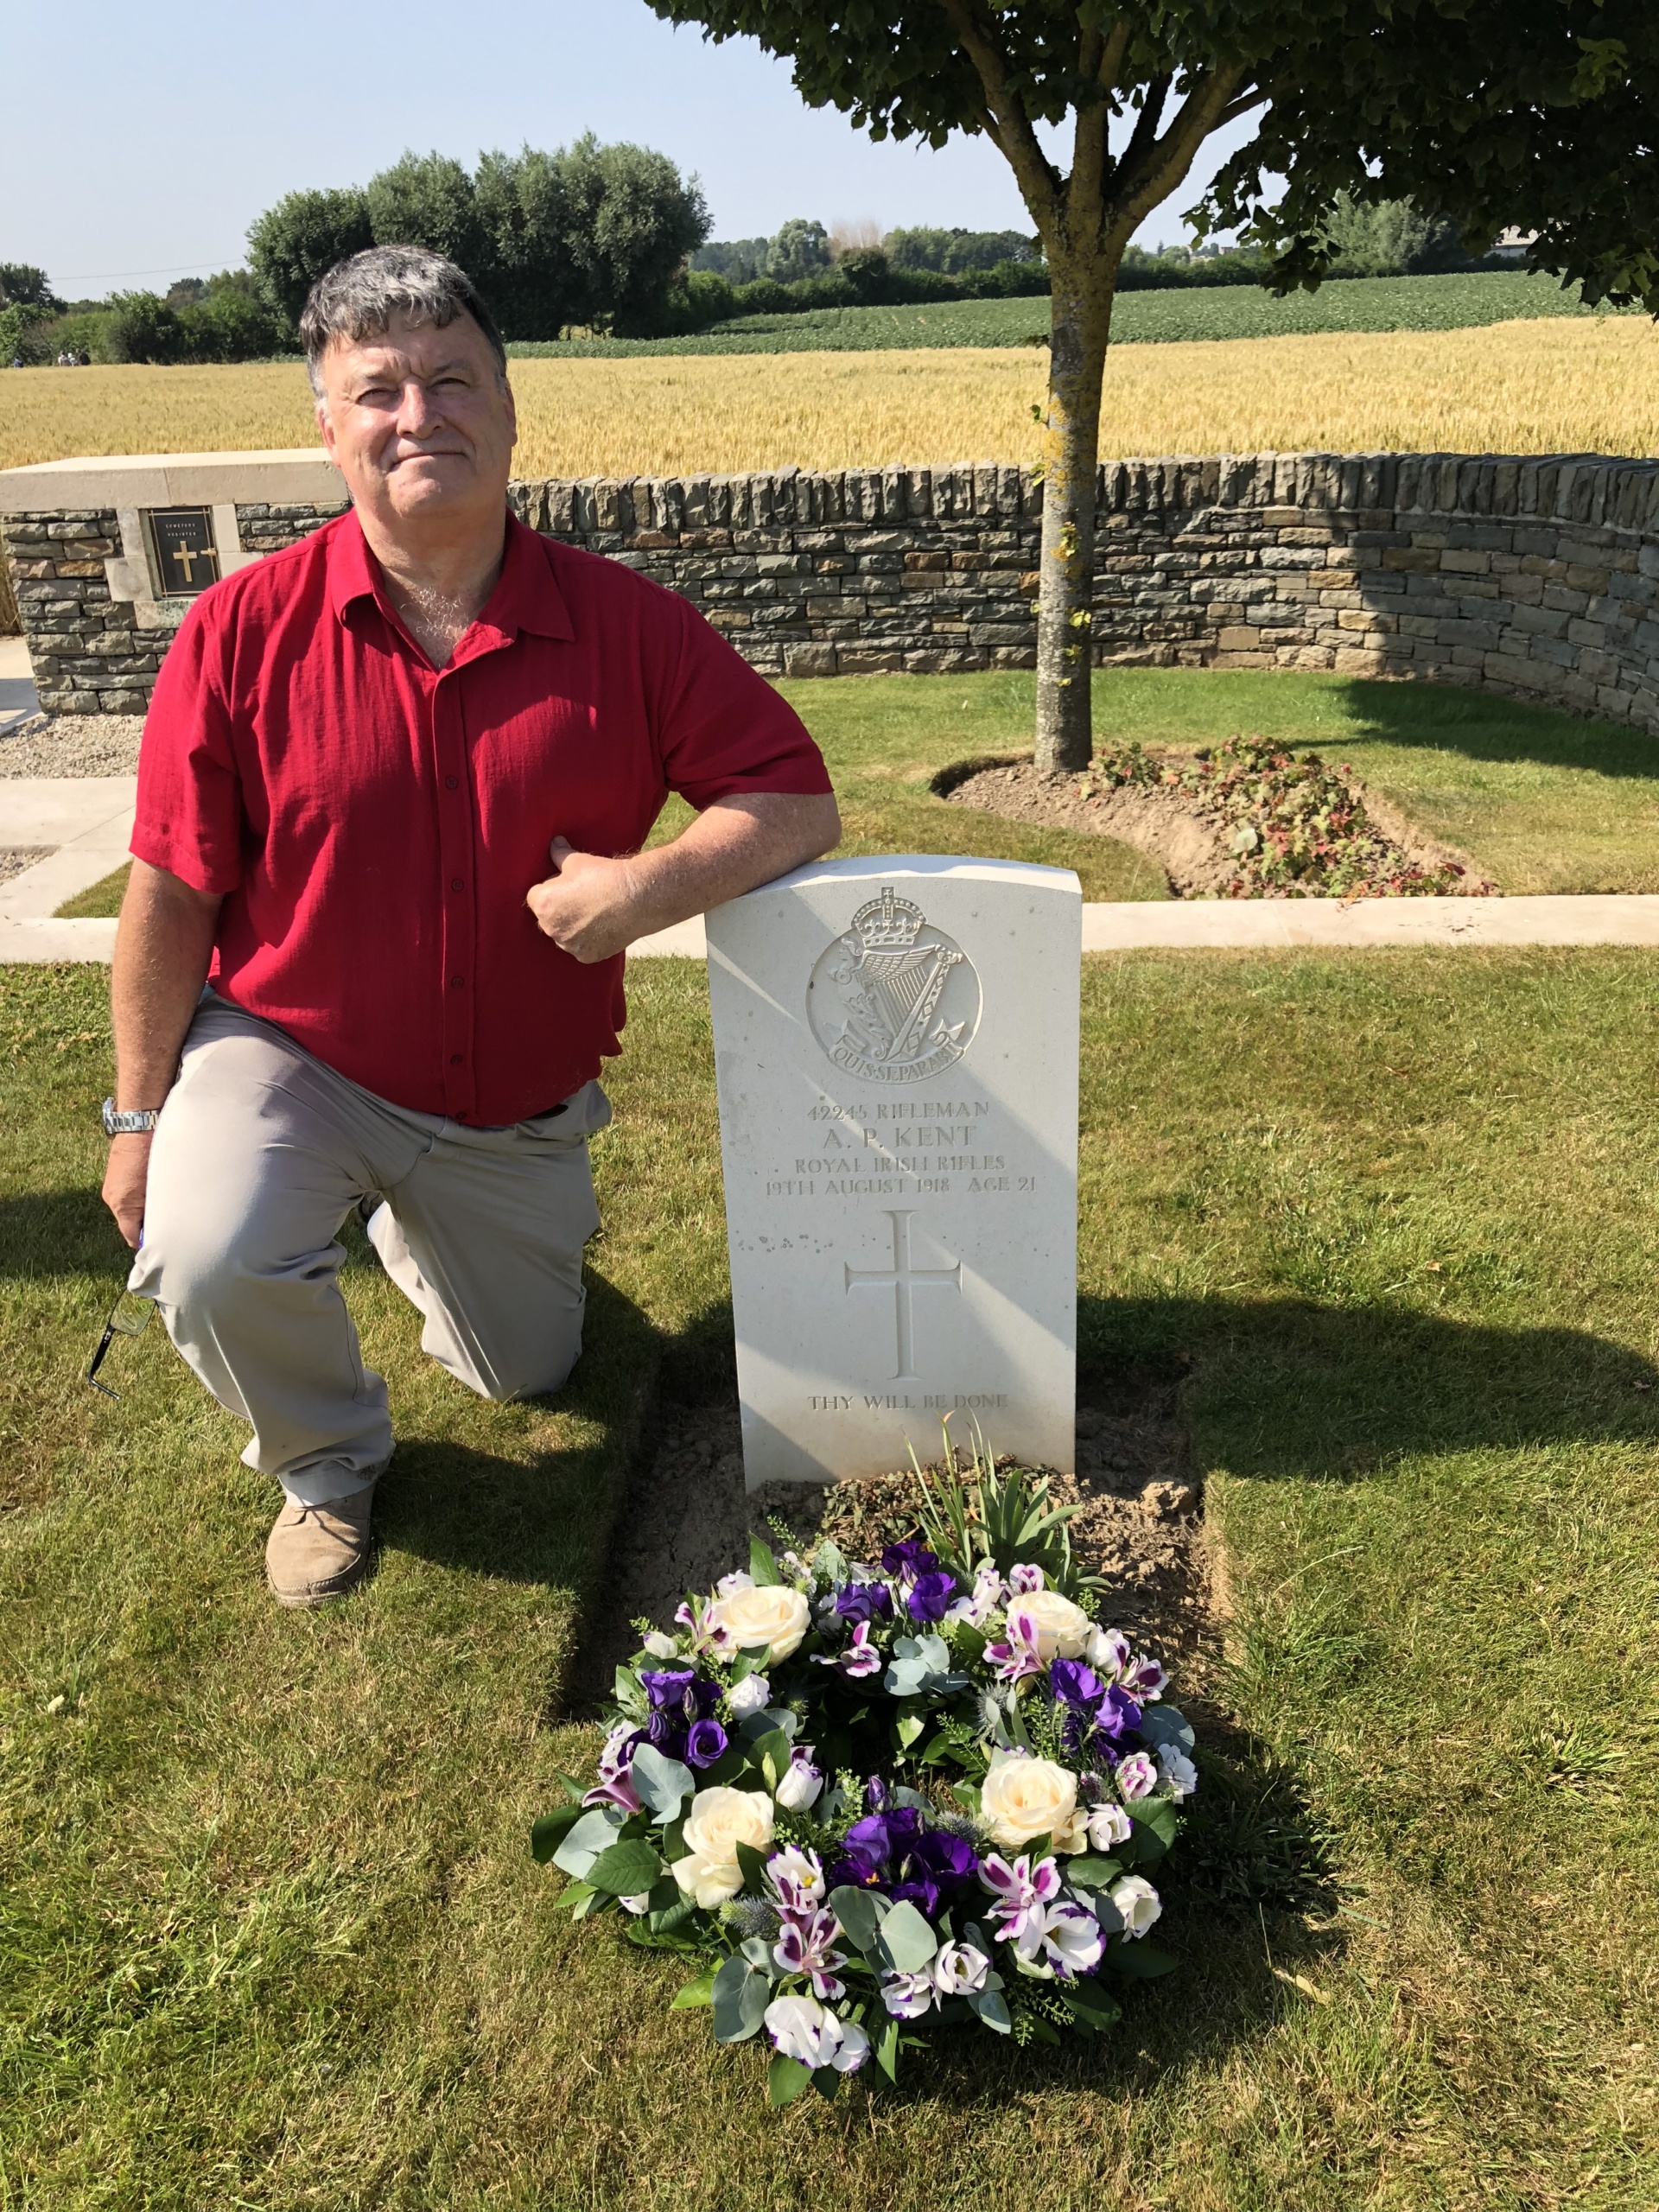 Visiting Great Uncle's resting place in Normandy in 2018 on the Centenary of WW1